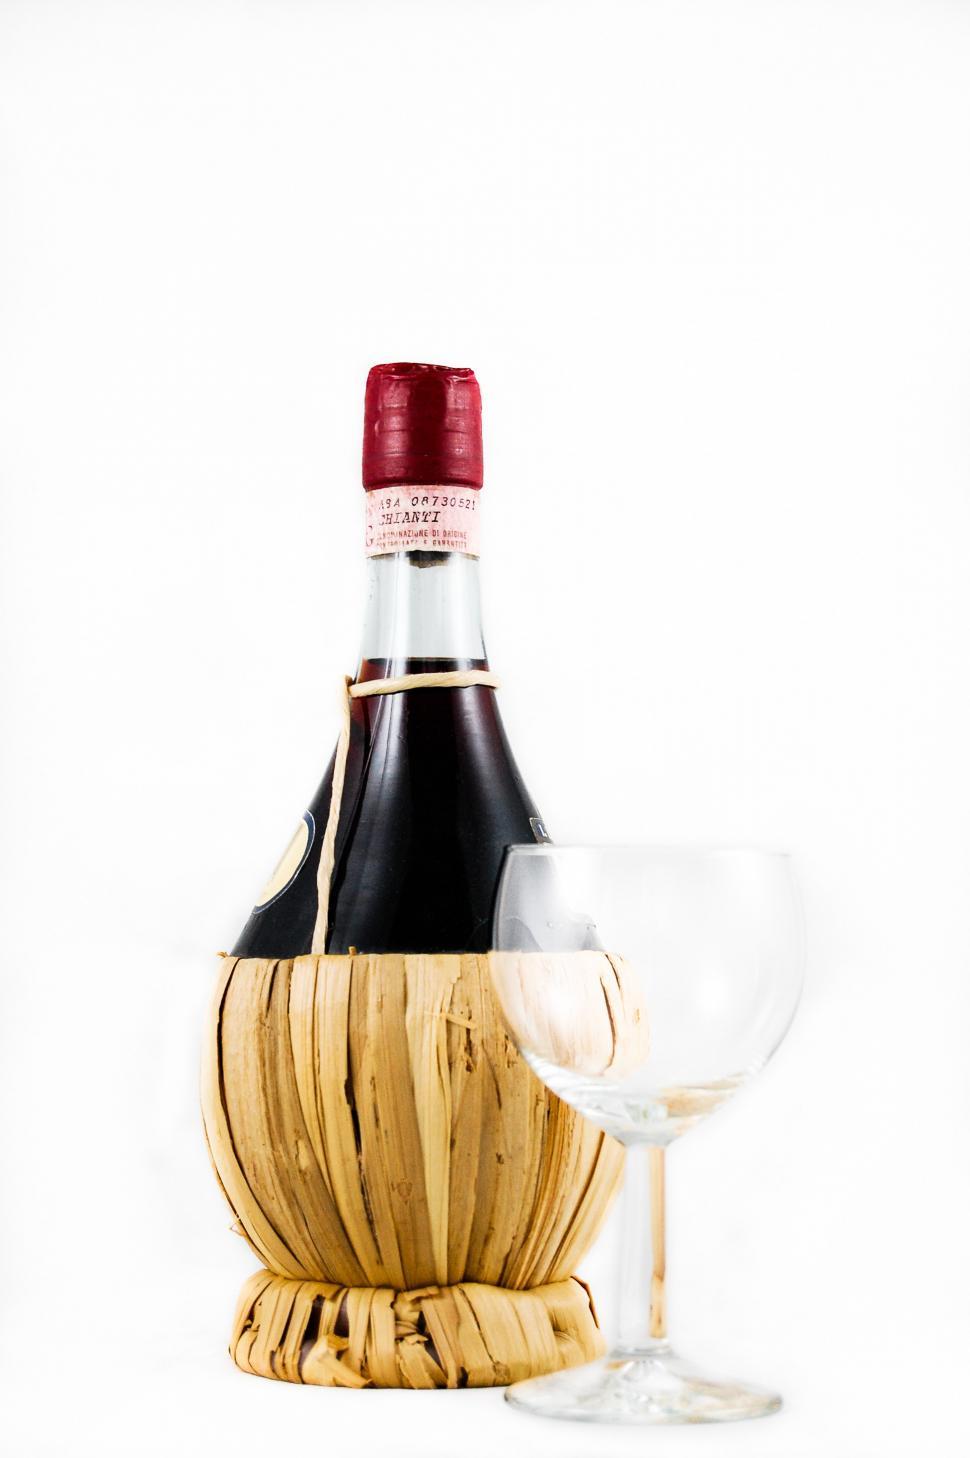 Free Image of Bottle of Wine Next to Wine Glass 